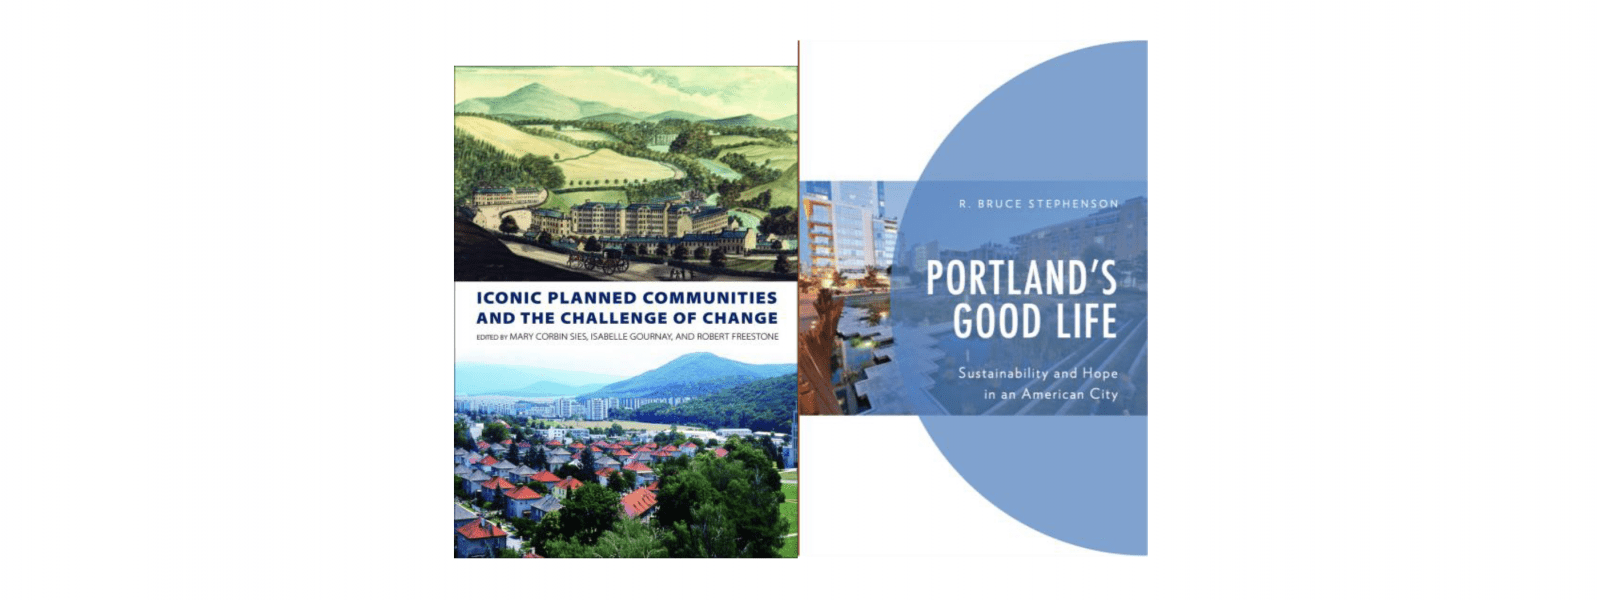 Iconic Planned Communities and Portland's Good Life book covers